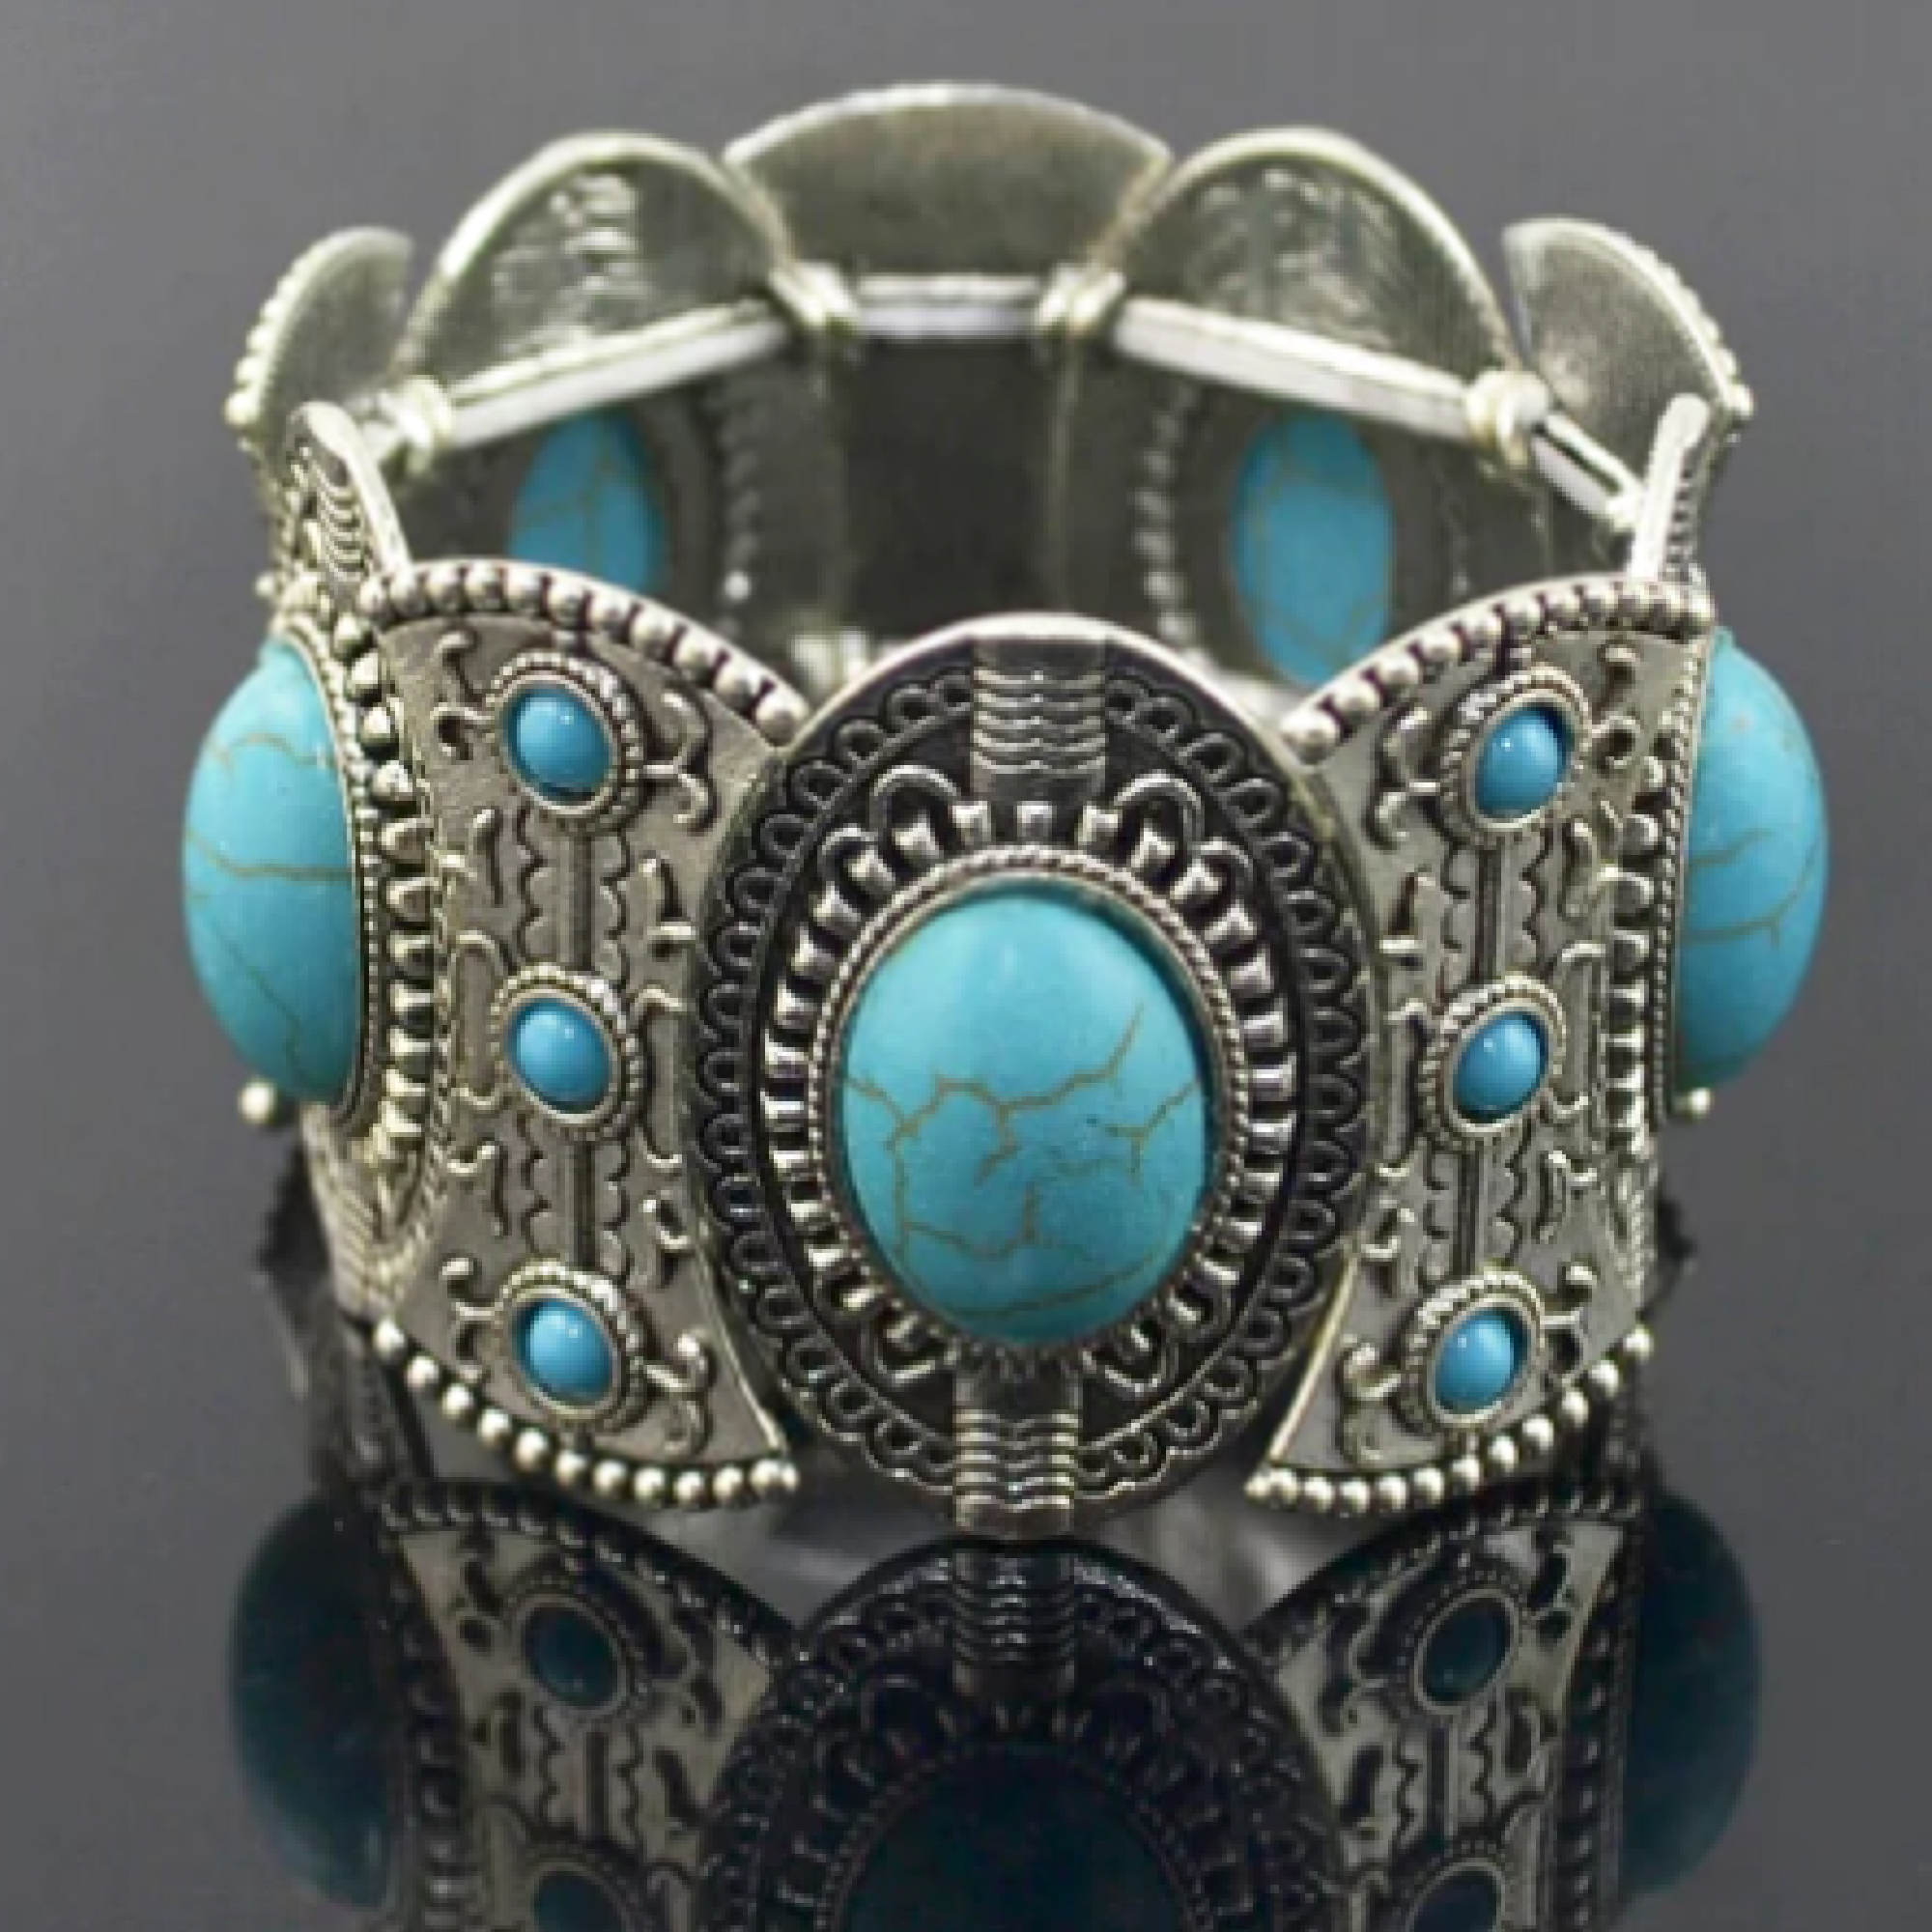 Gifts Are Blue Women's Vintage Boho Turquoise Cuff Stretch Bracelet, Ethnic Fashion Jewelry